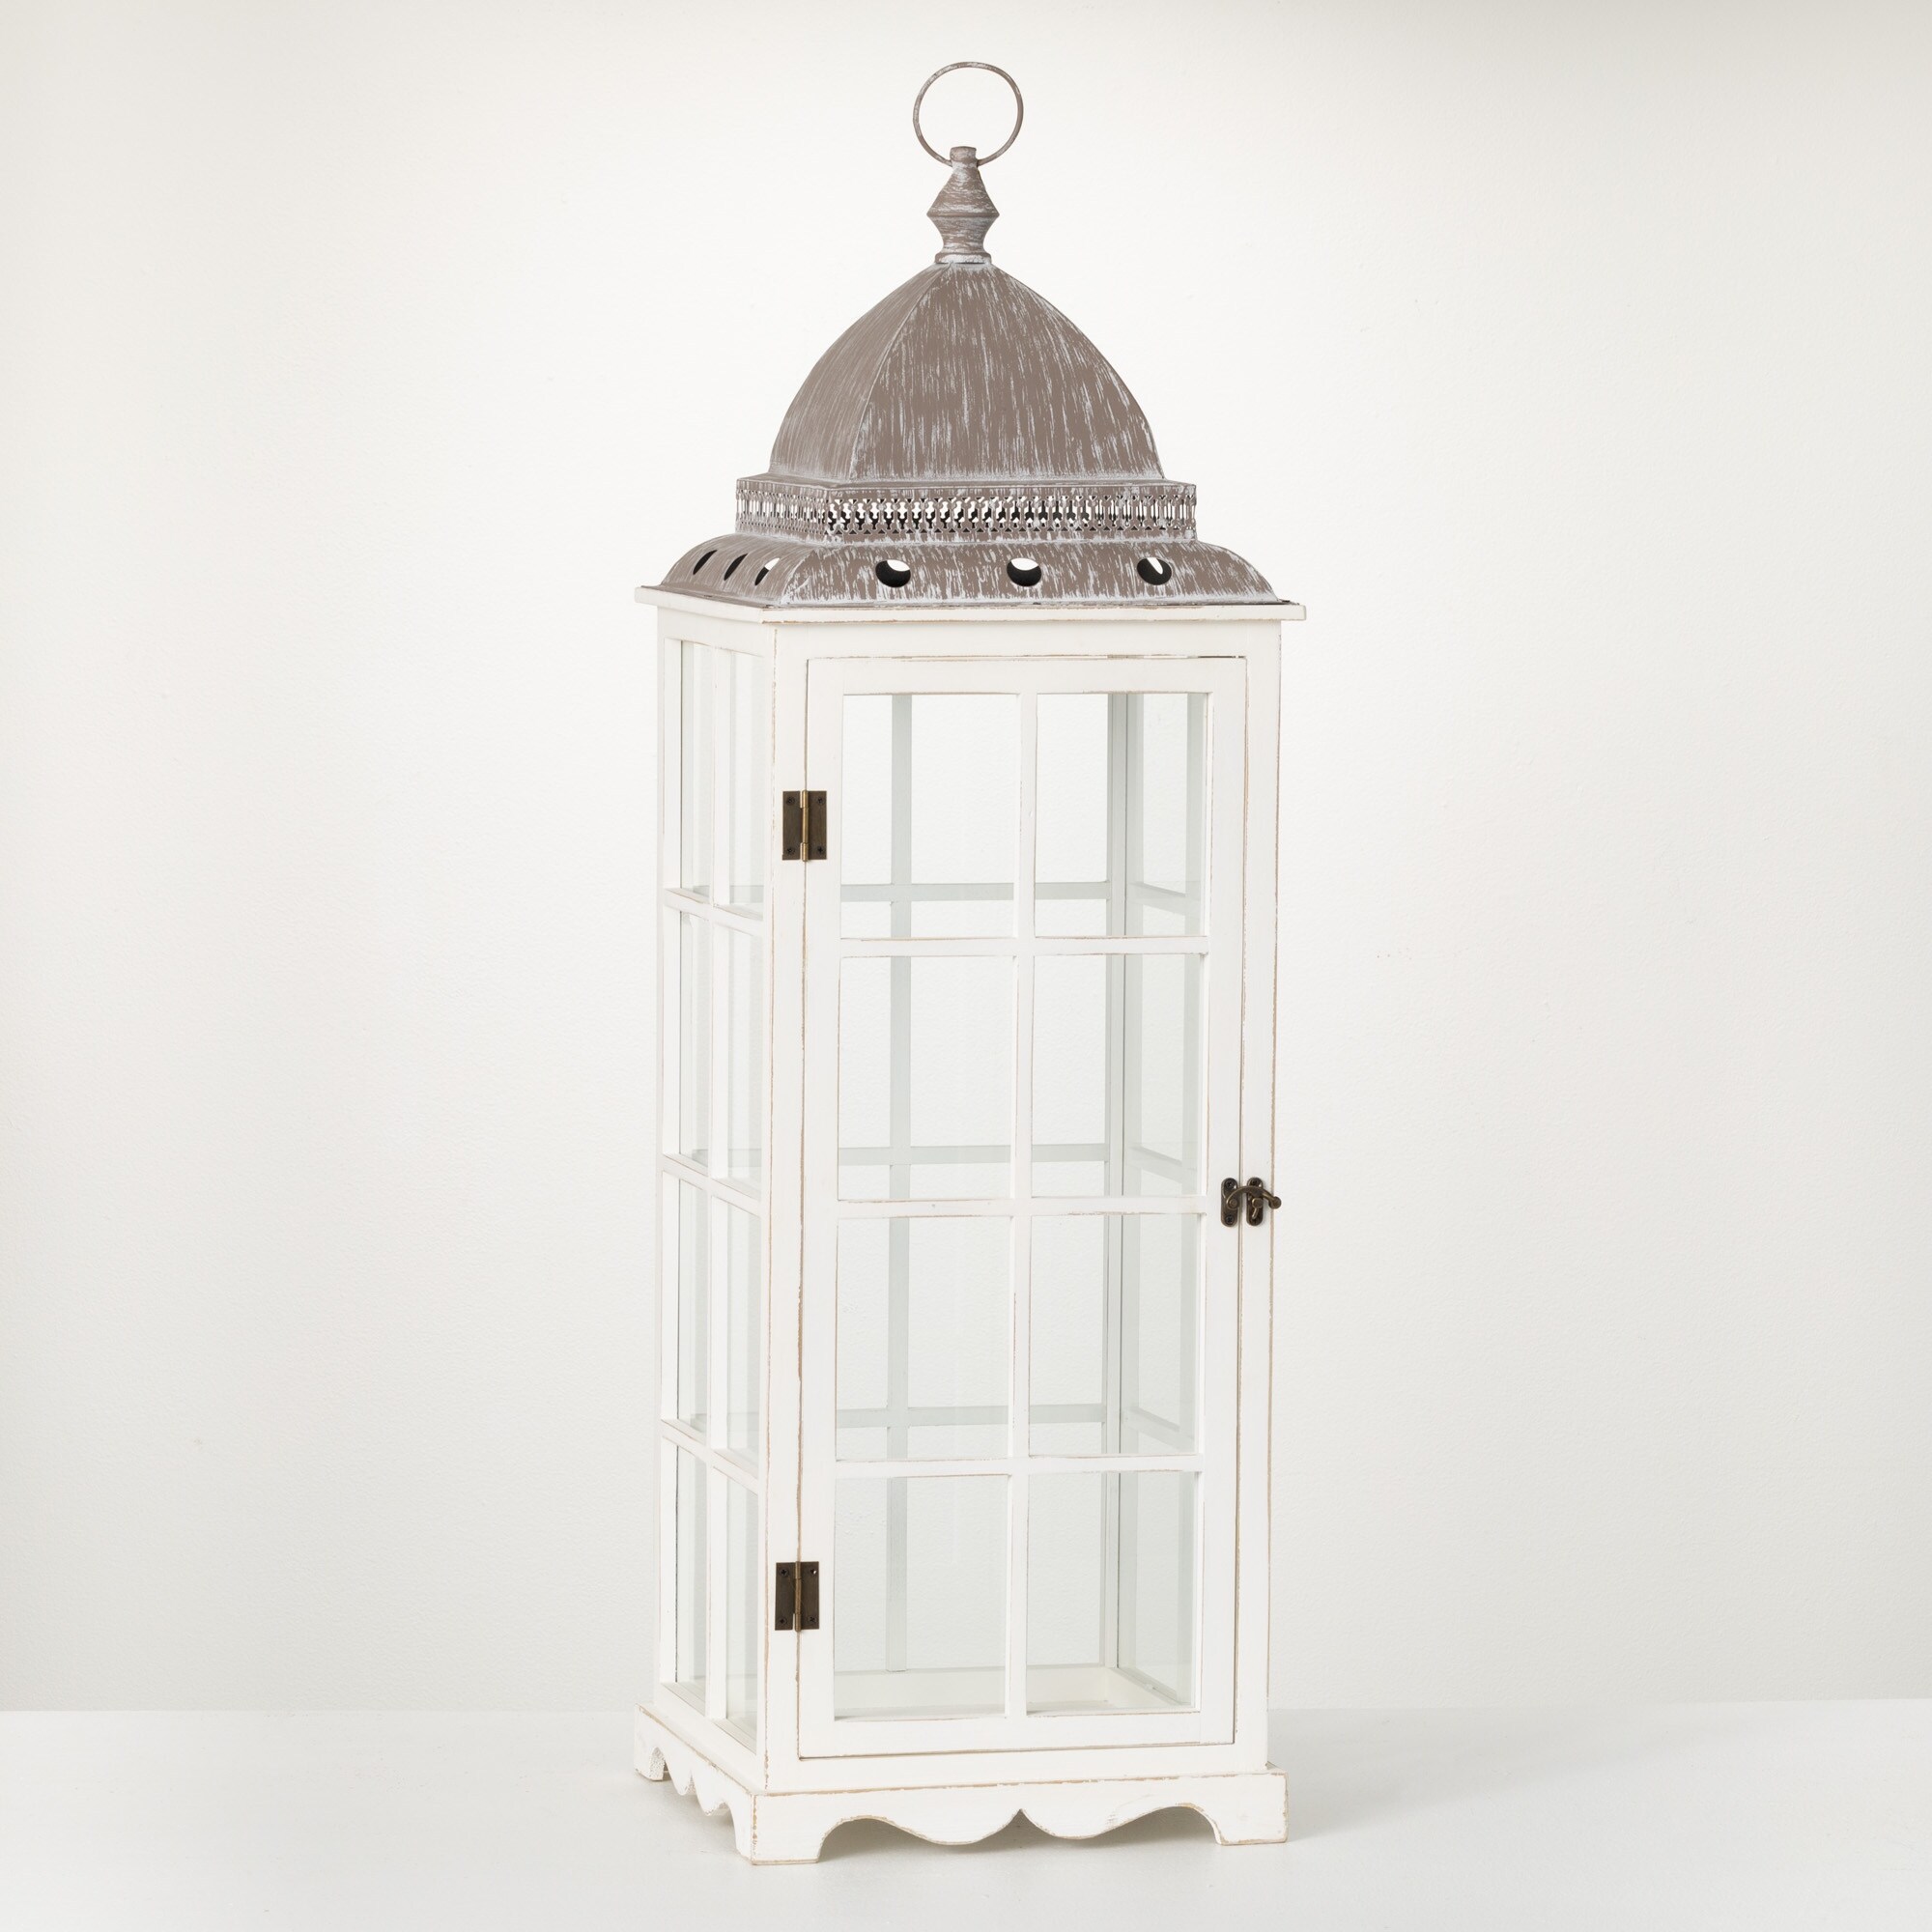 https://ak1.ostkcdn.com/images/products/is/images/direct/f1faad0dd70807afb7c8a1ab97ba62a7c18e715f/Classic-White-Panel-Lantern.jpg